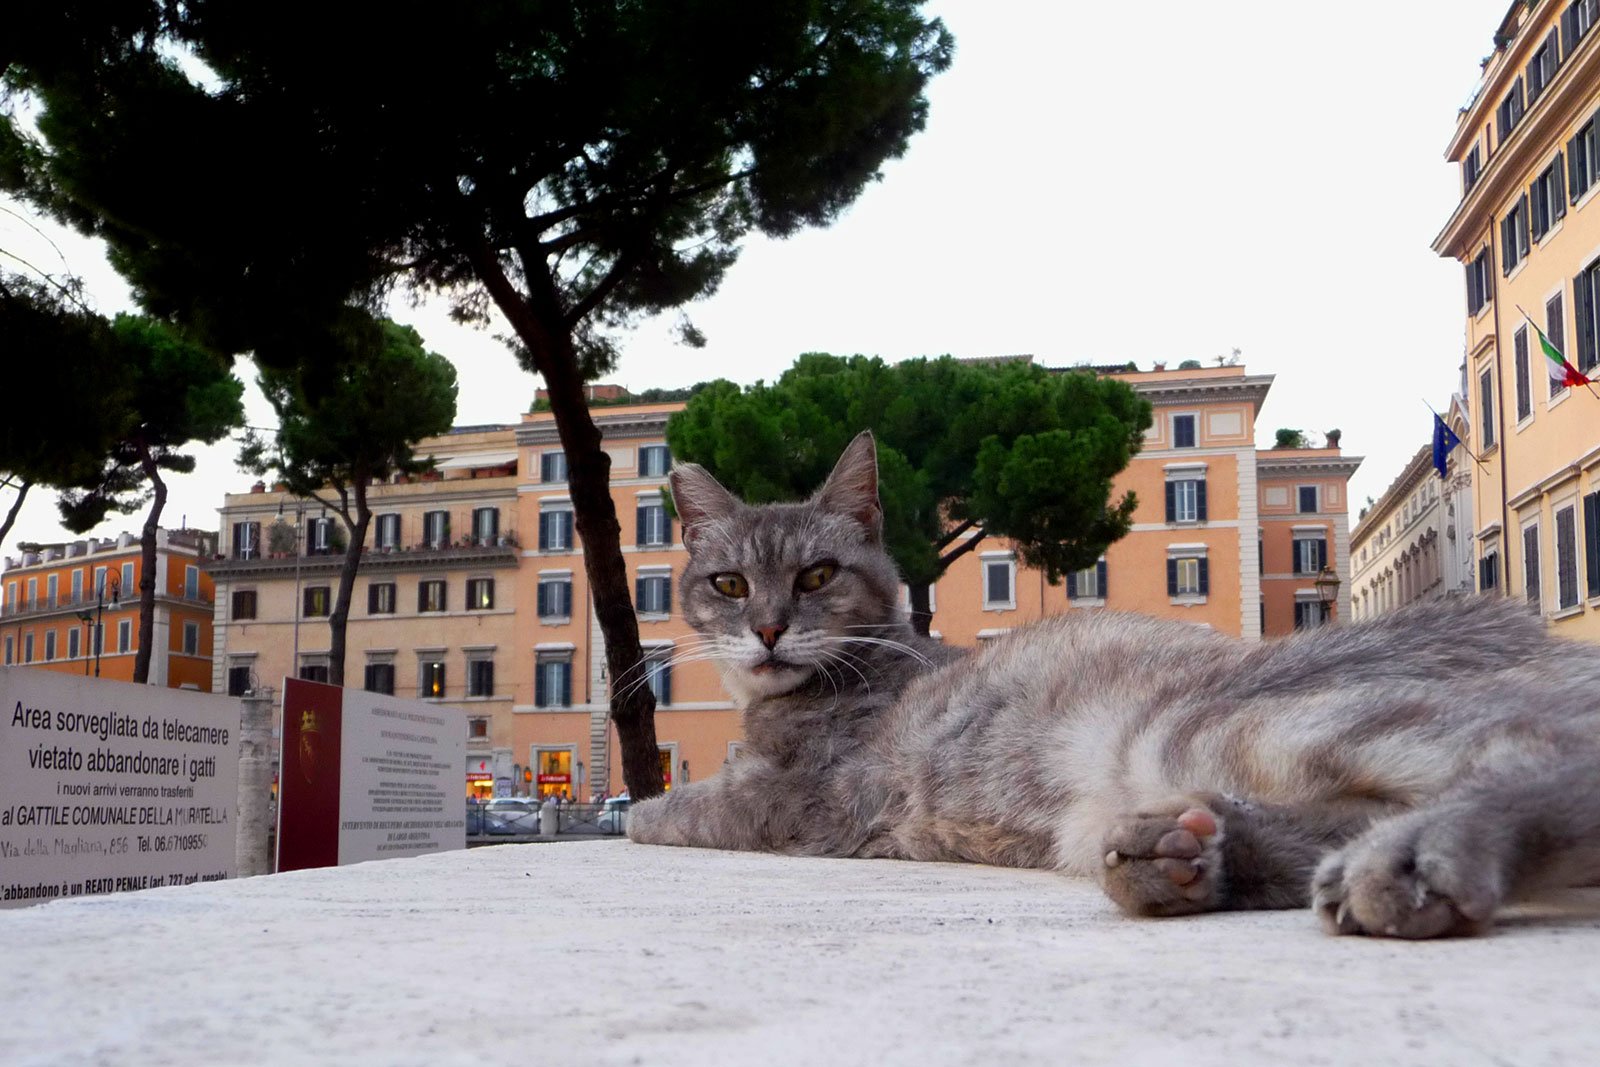 How to become a cat caregiver in Rome